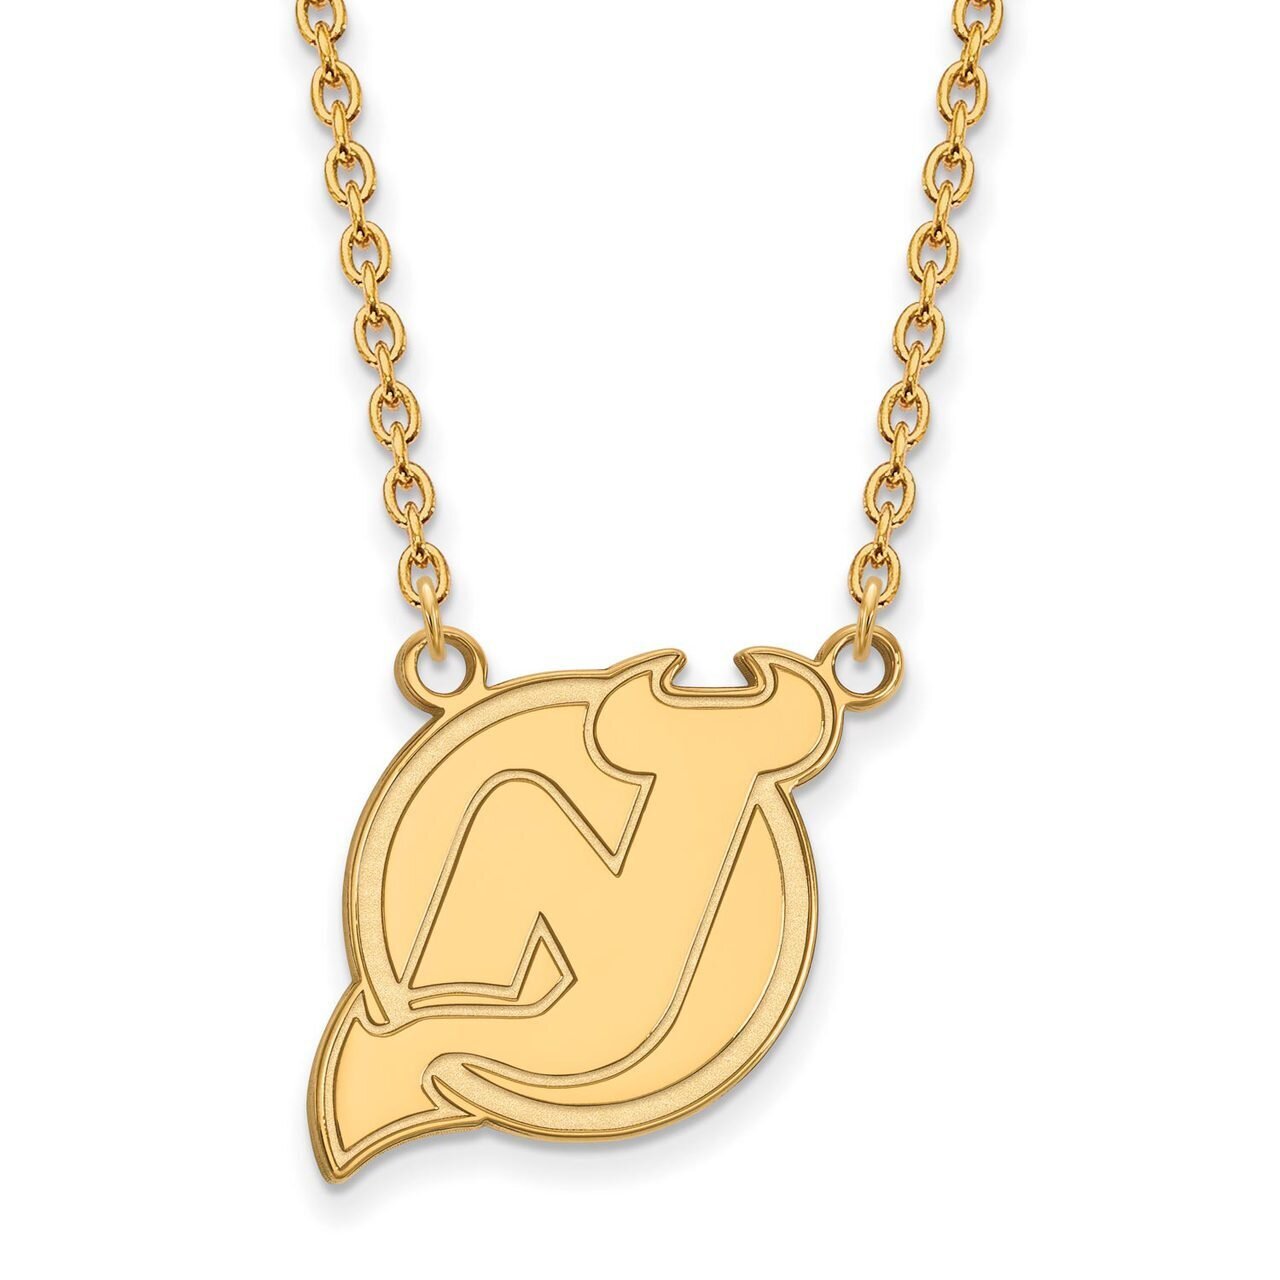 New Jersey Devils Large Pendant with Chain Necklace Gold-plated Silver GP014DVL-18